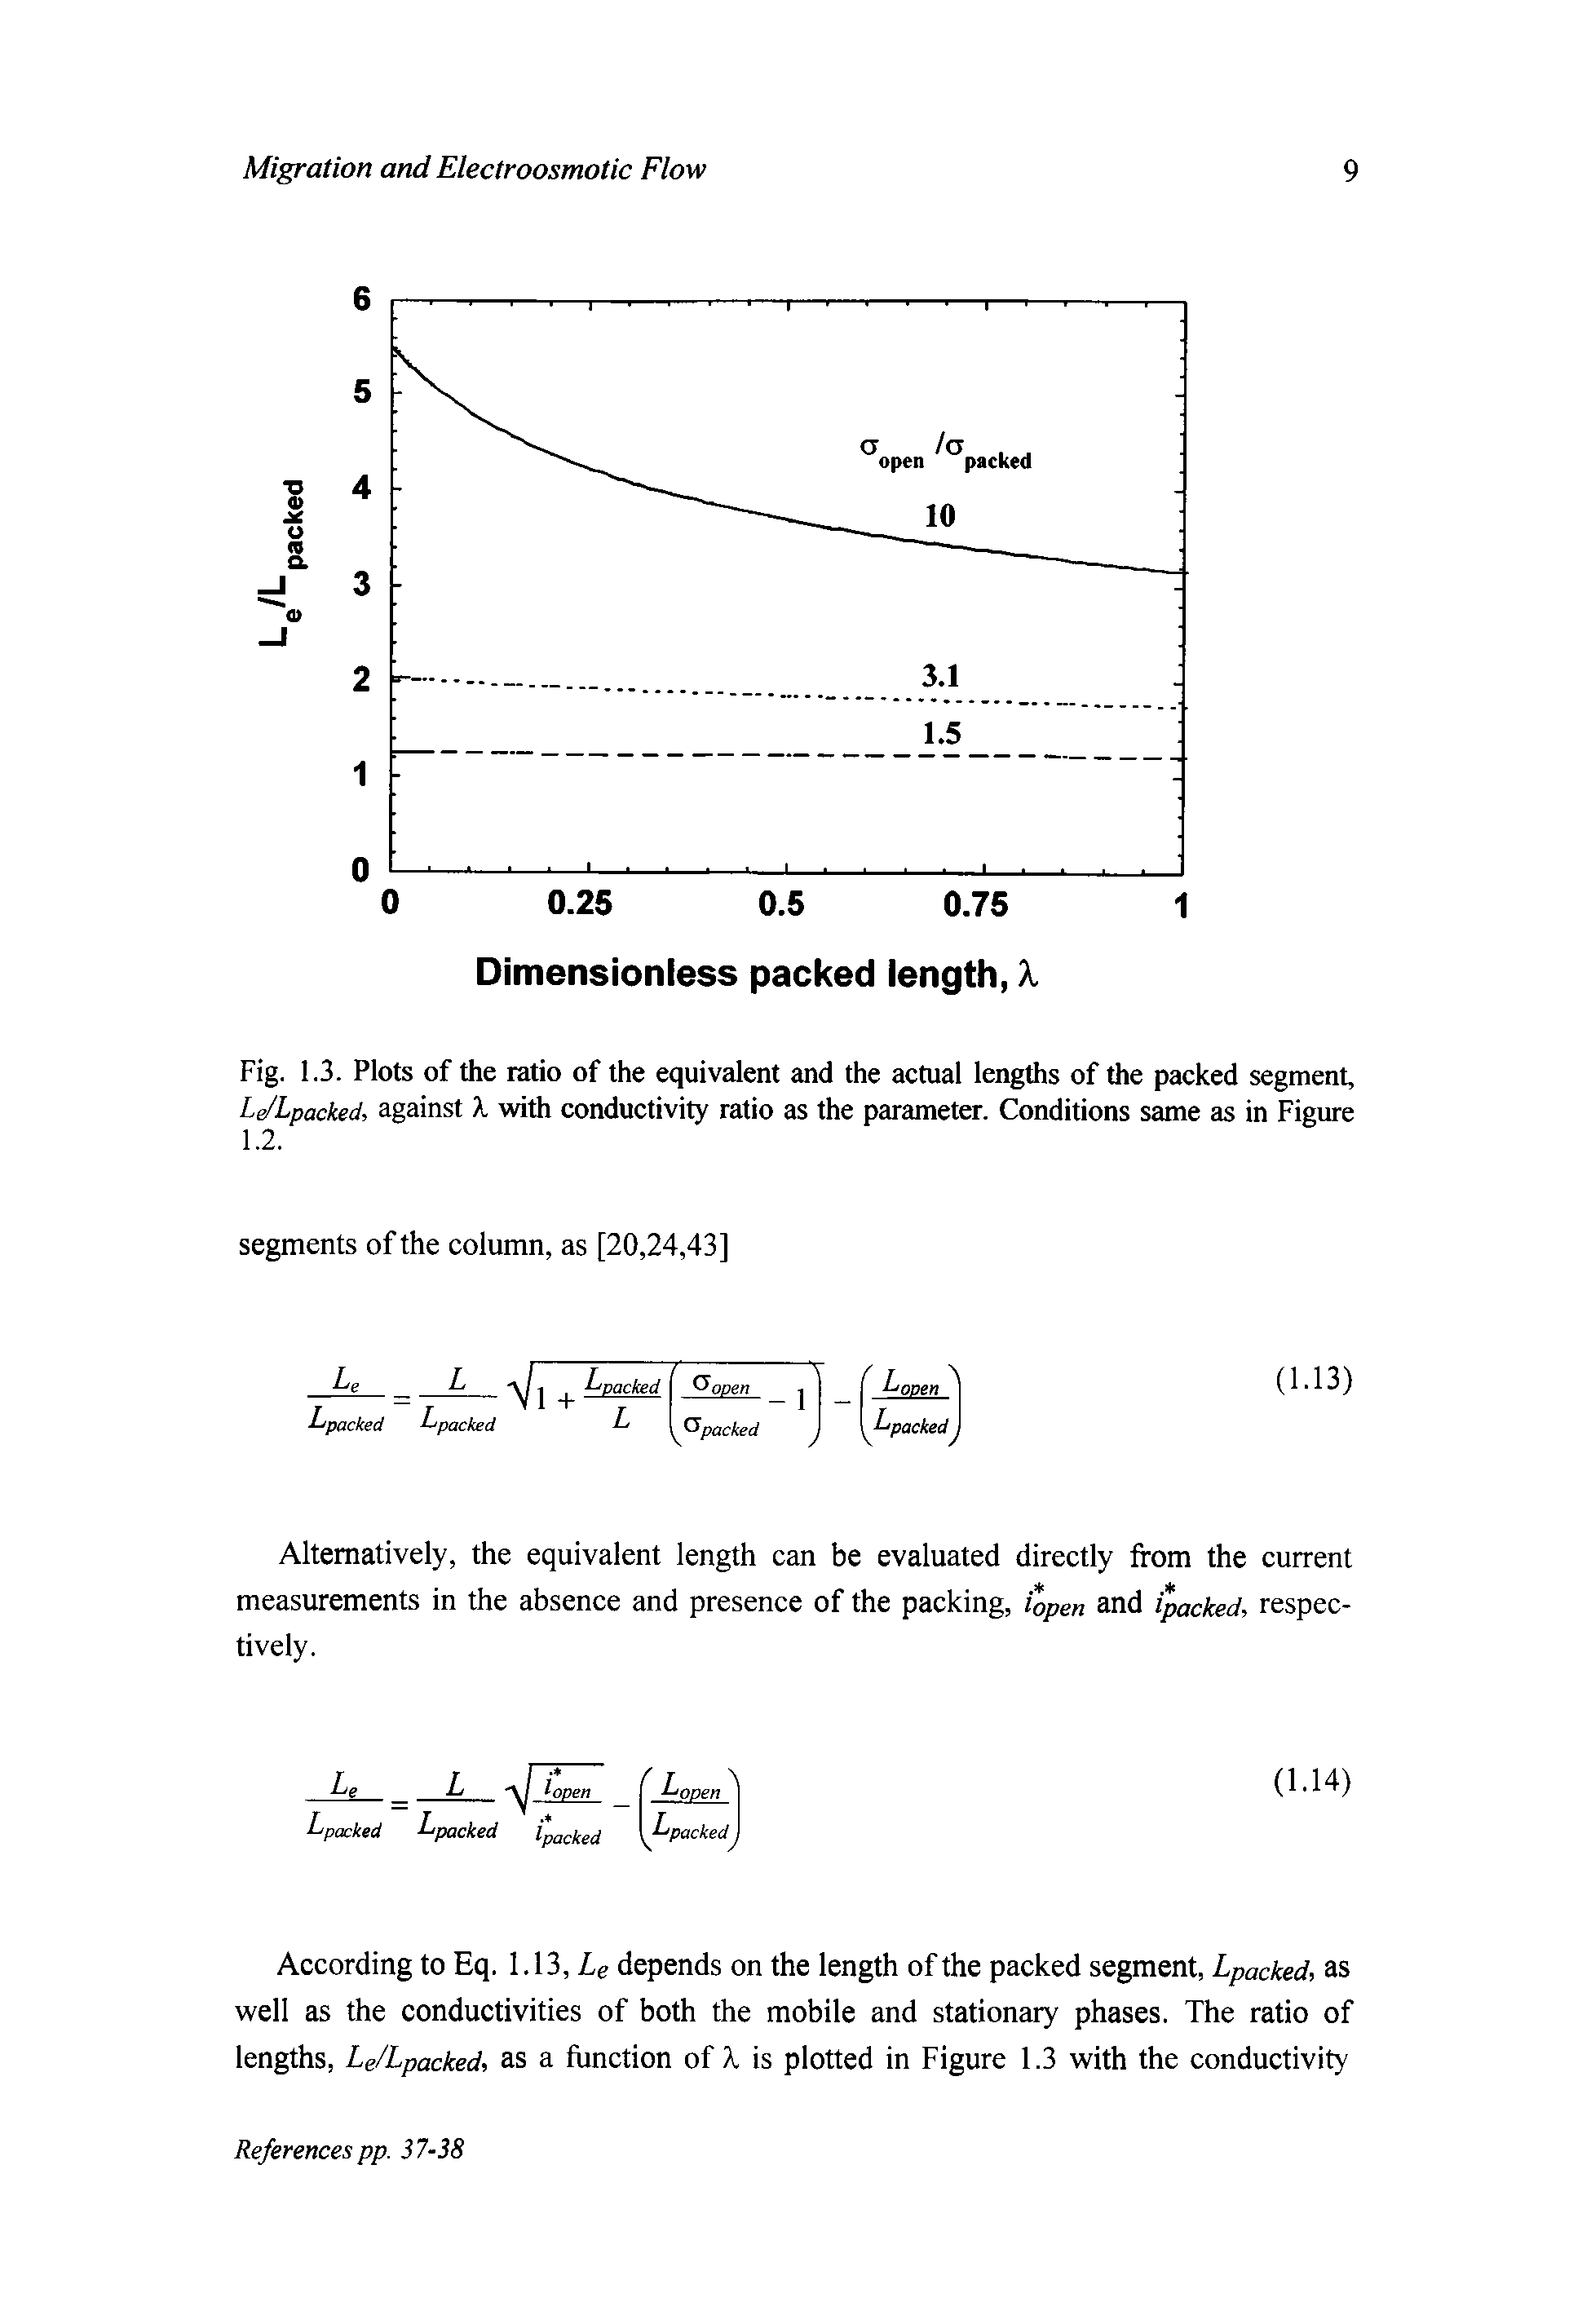 Fig. 1.3. Plots of the ratio of the equivalent and the actual lengths of the packed segment, Le/Lpacked, against X with conductivity ratio as the parameter. Conditions same as in Figure 1.2.